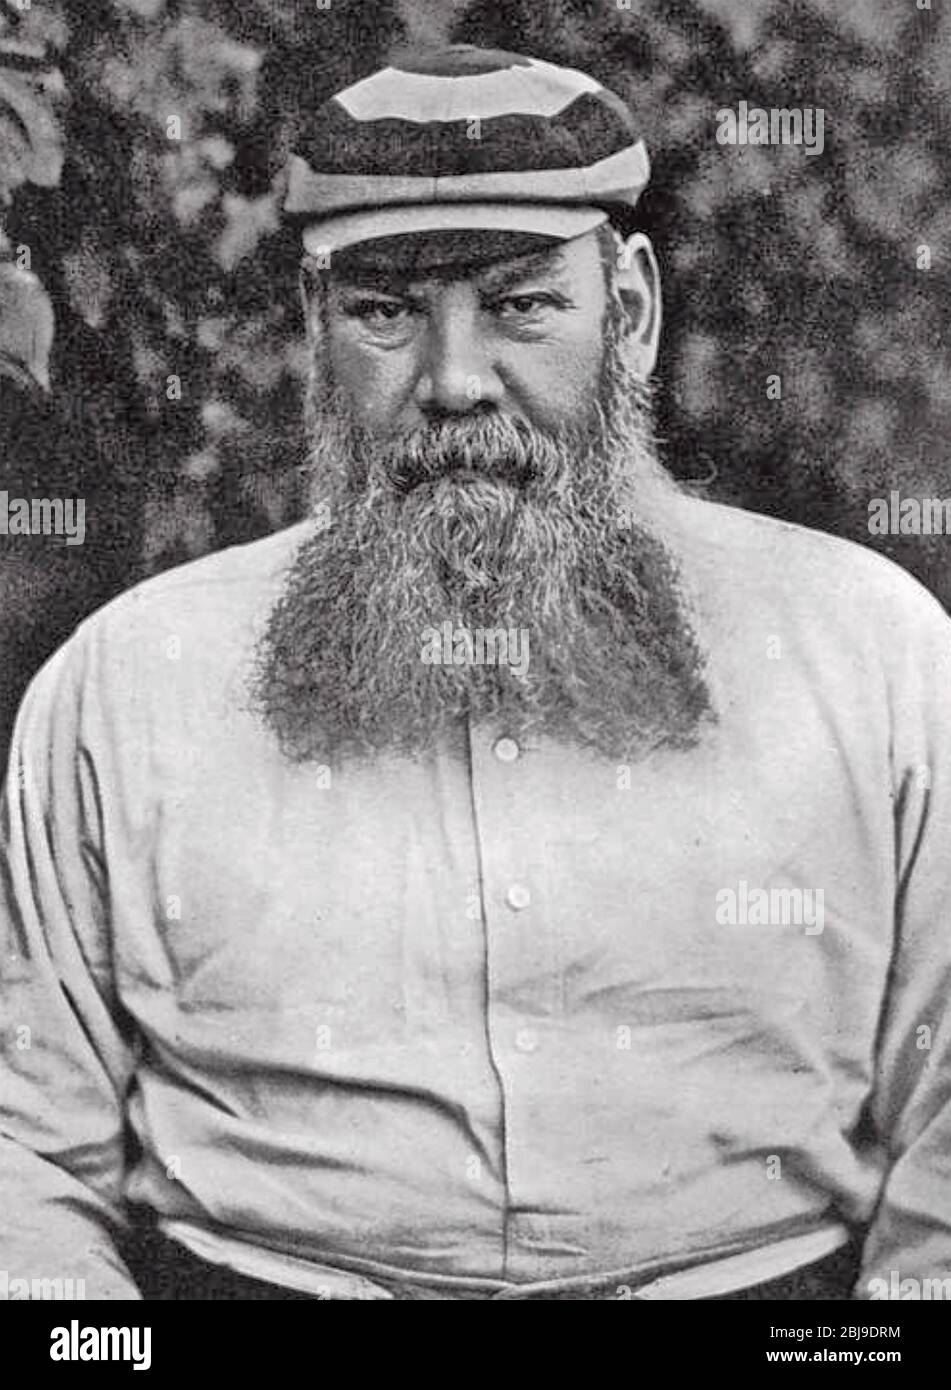 W.G.GRACE (1848-1915) English amateur cricketer about 1902 Stock Photo